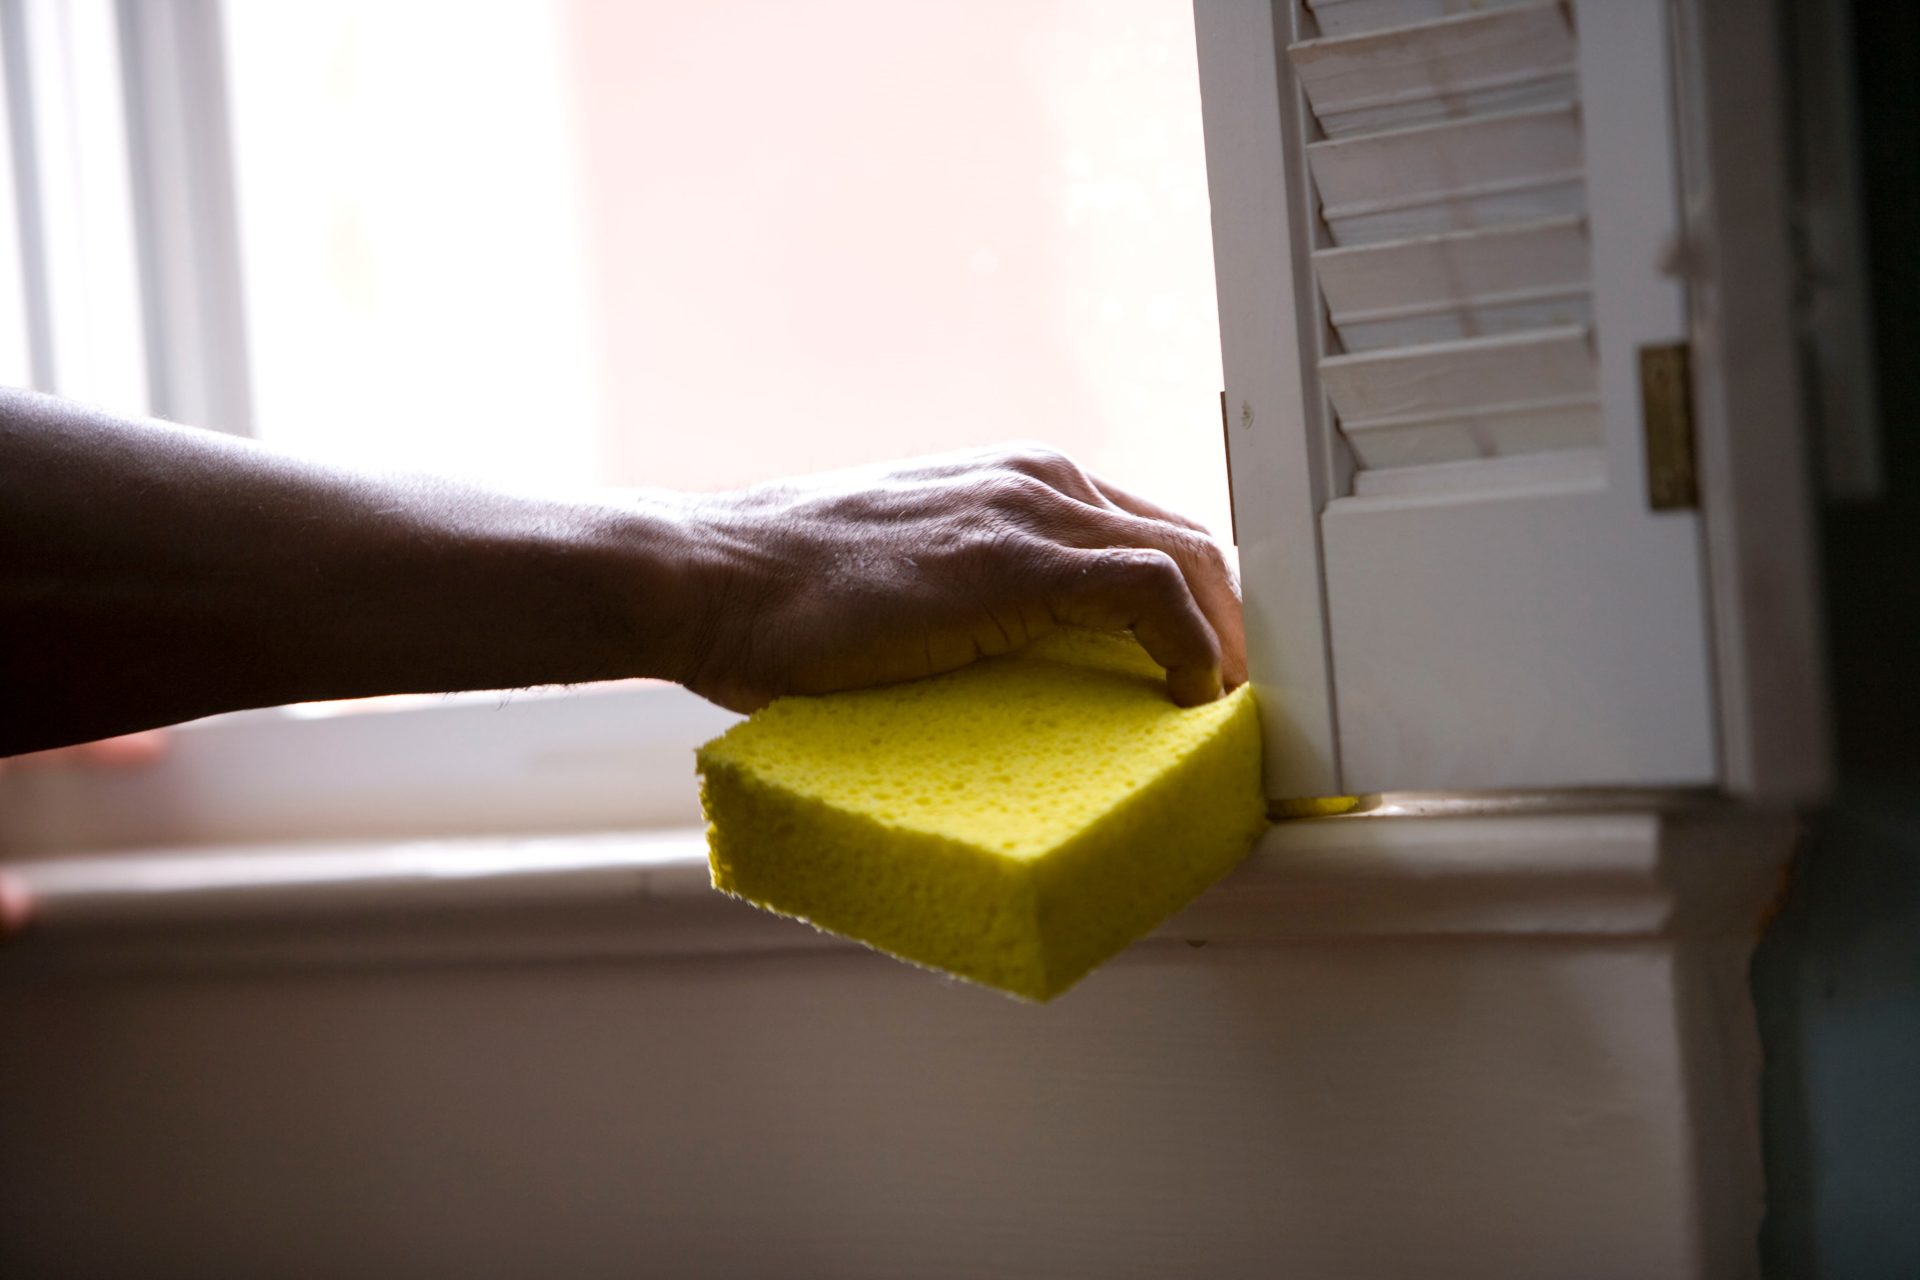 cleaning window with yellow sponge